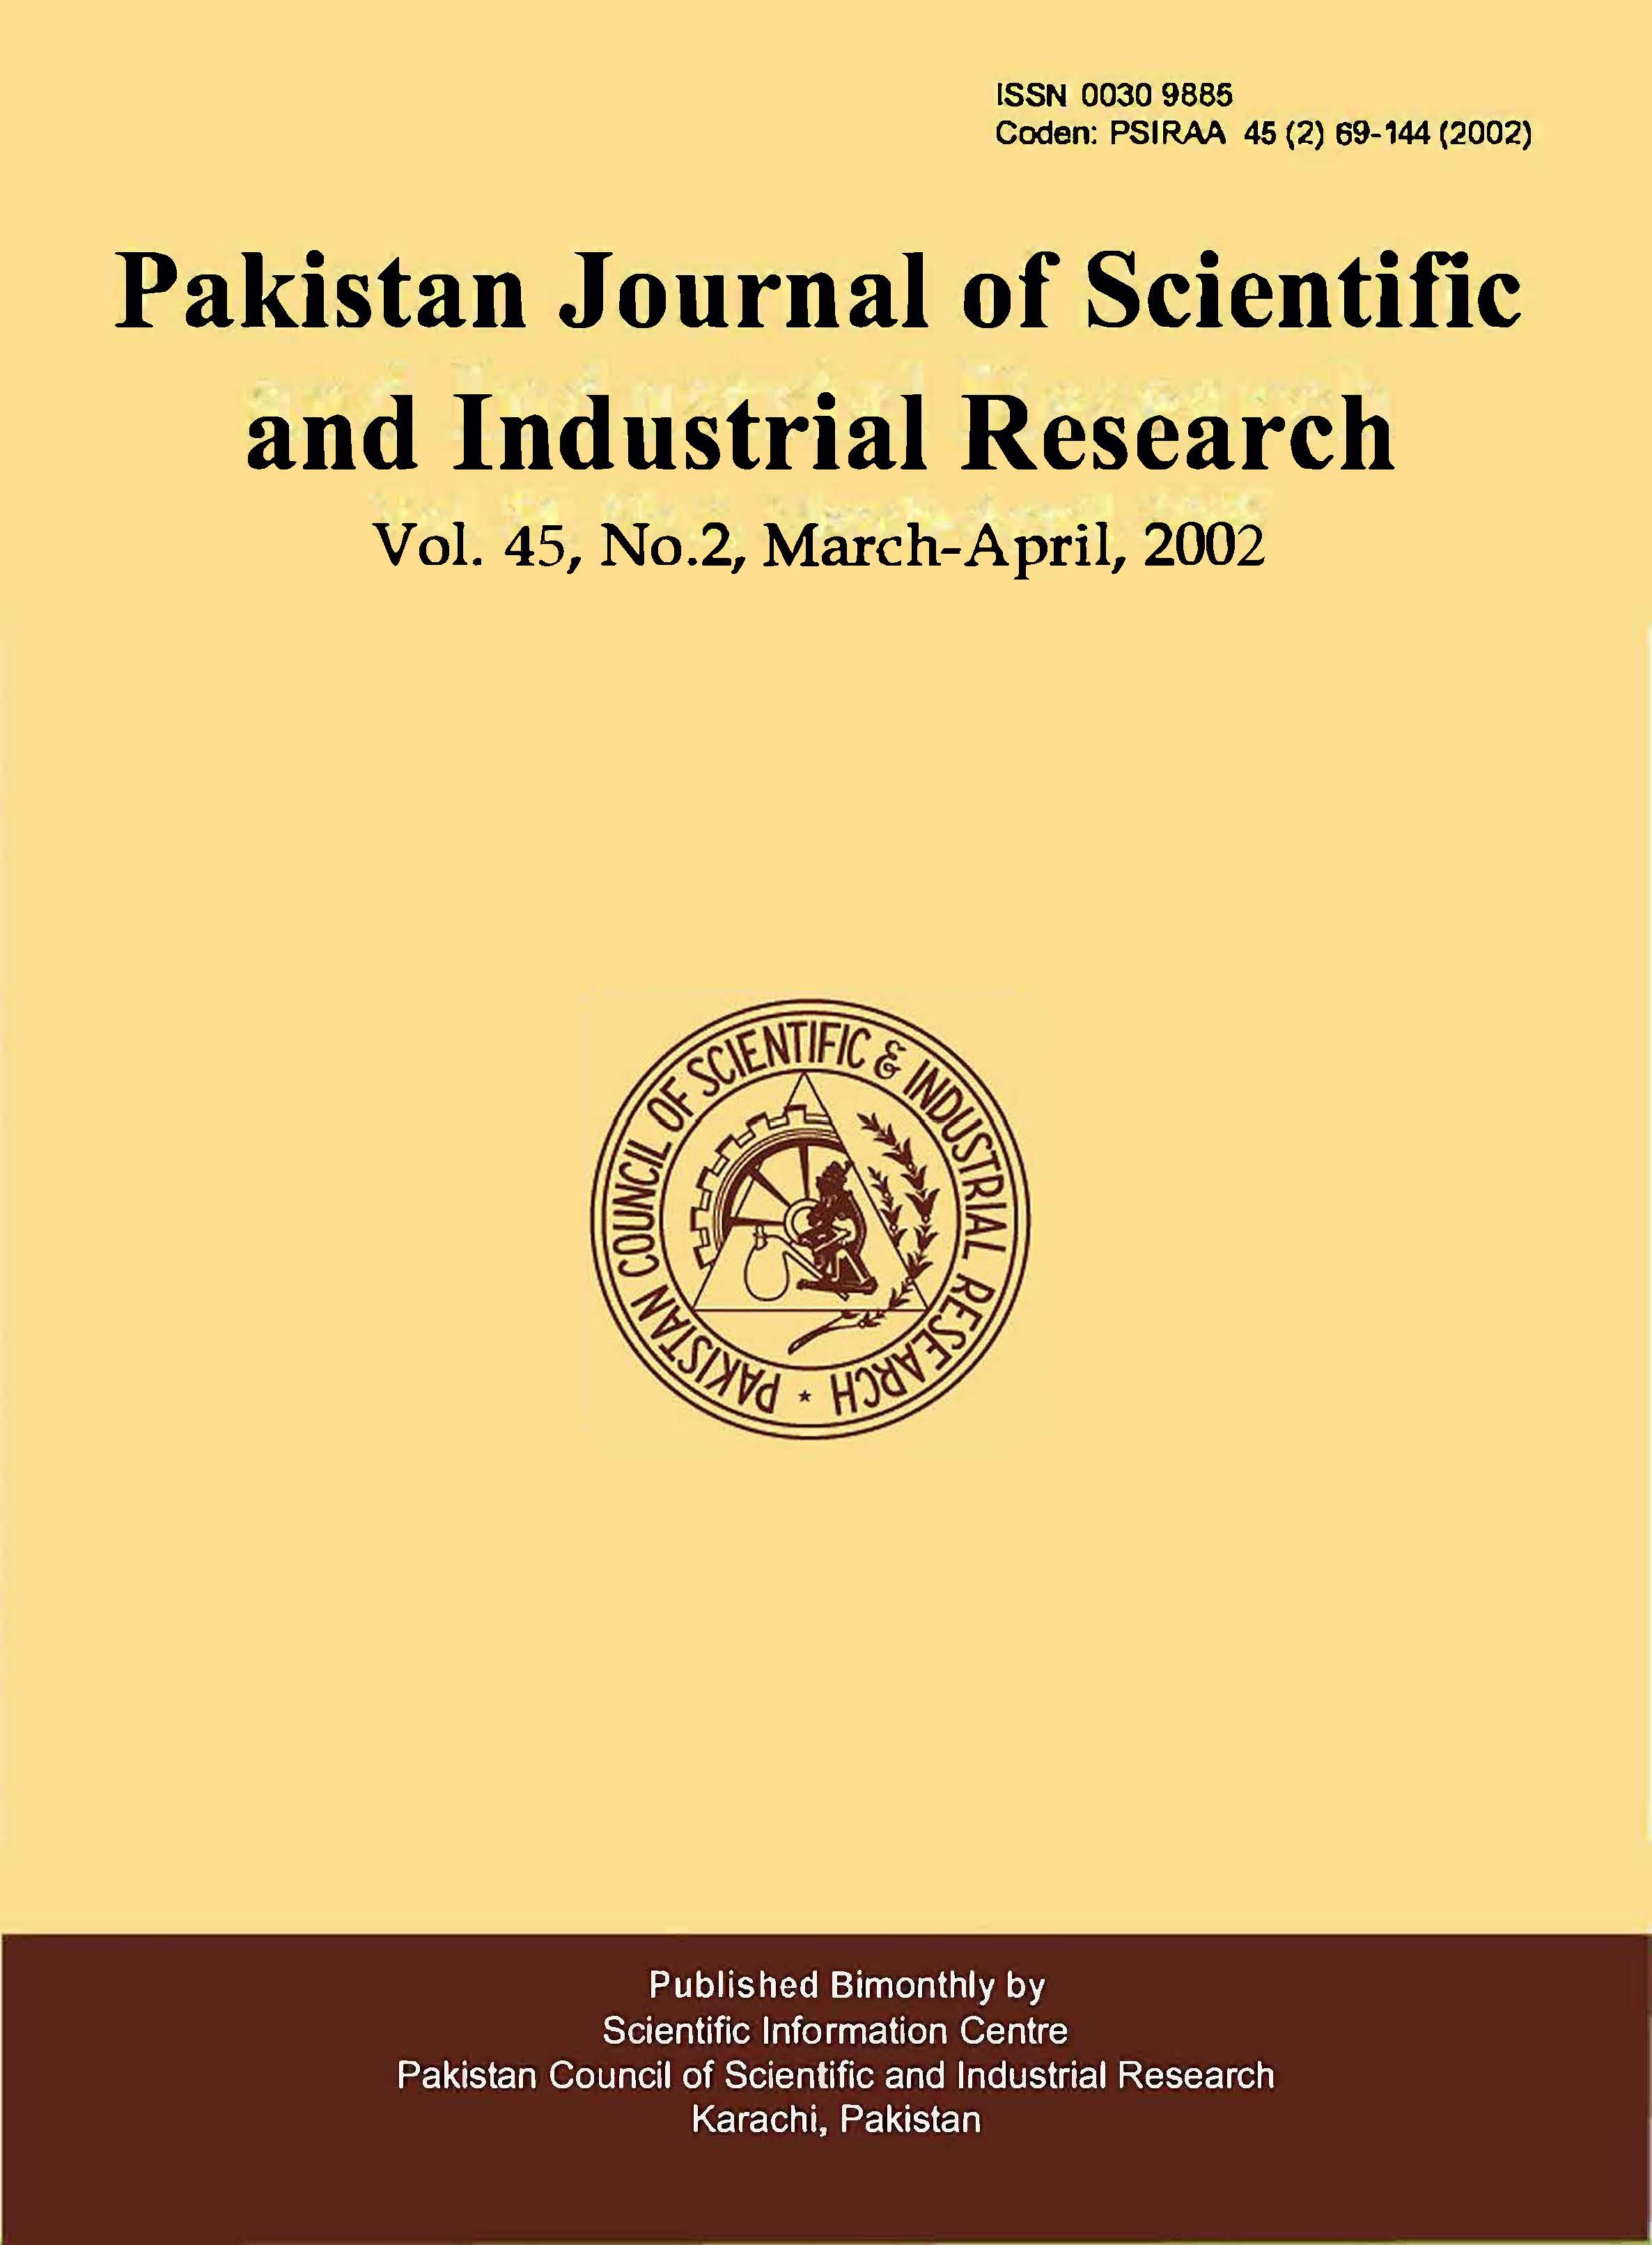 					View Vol. 45 No. 2 (2002): Pakistan Journal of Scientific and Industrial Research
				